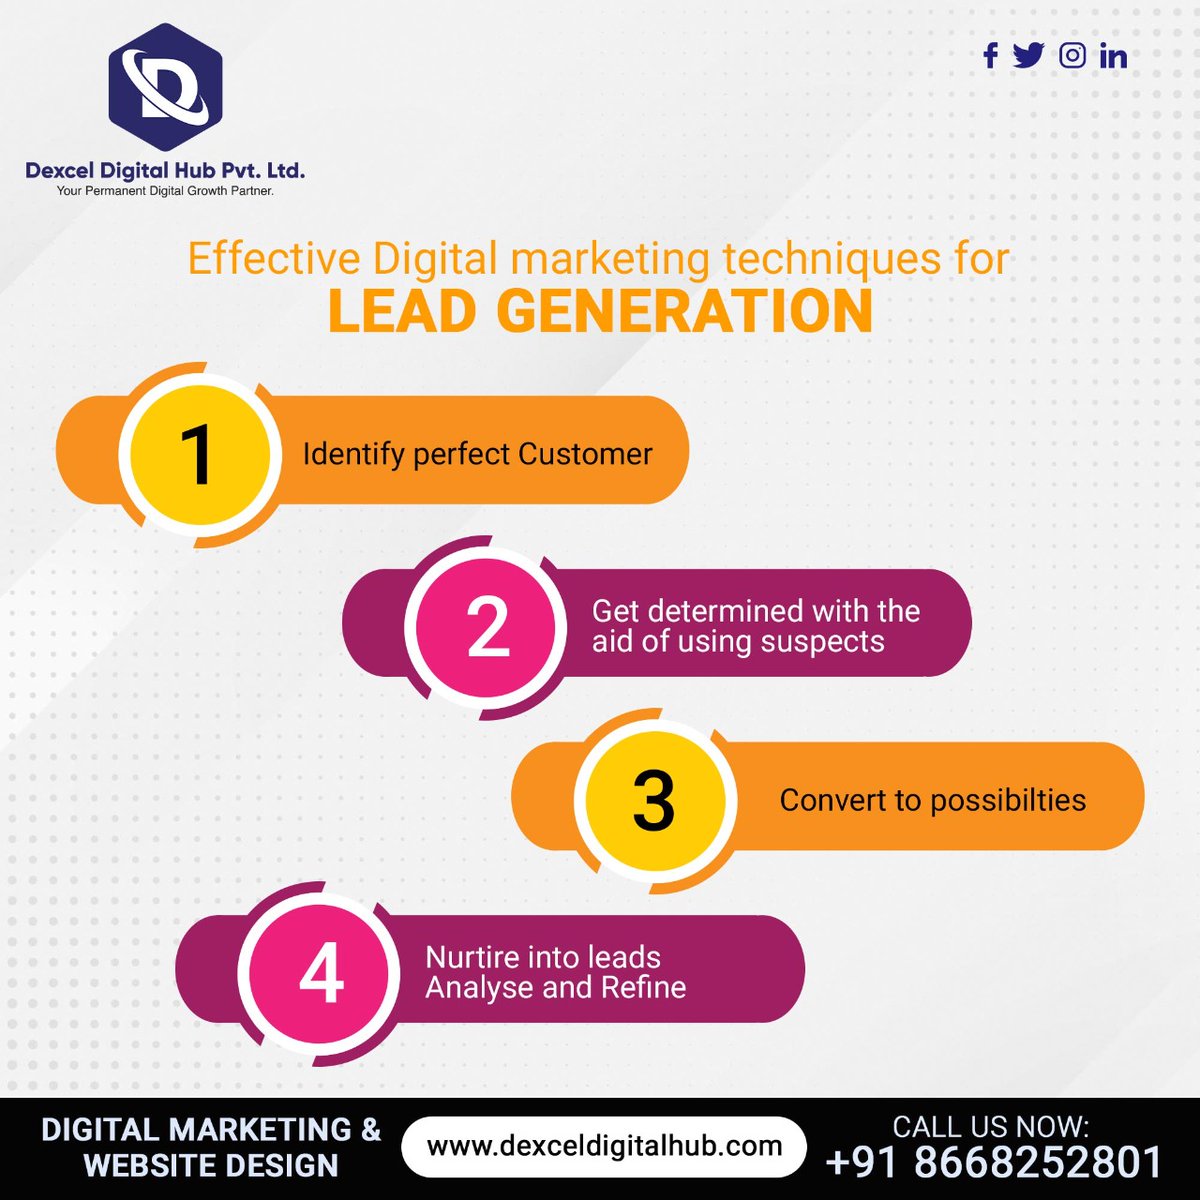 Without leads, you can’t generate sales and, ultimately, you can’t make money. 
#branding #brand #brandidentity #businessprofile #leadgeneration #leads #nurturingleads #websitedesign #webdevelopment  #marketingstrategy #advertisingandmarketing #engagement #qualitycontent